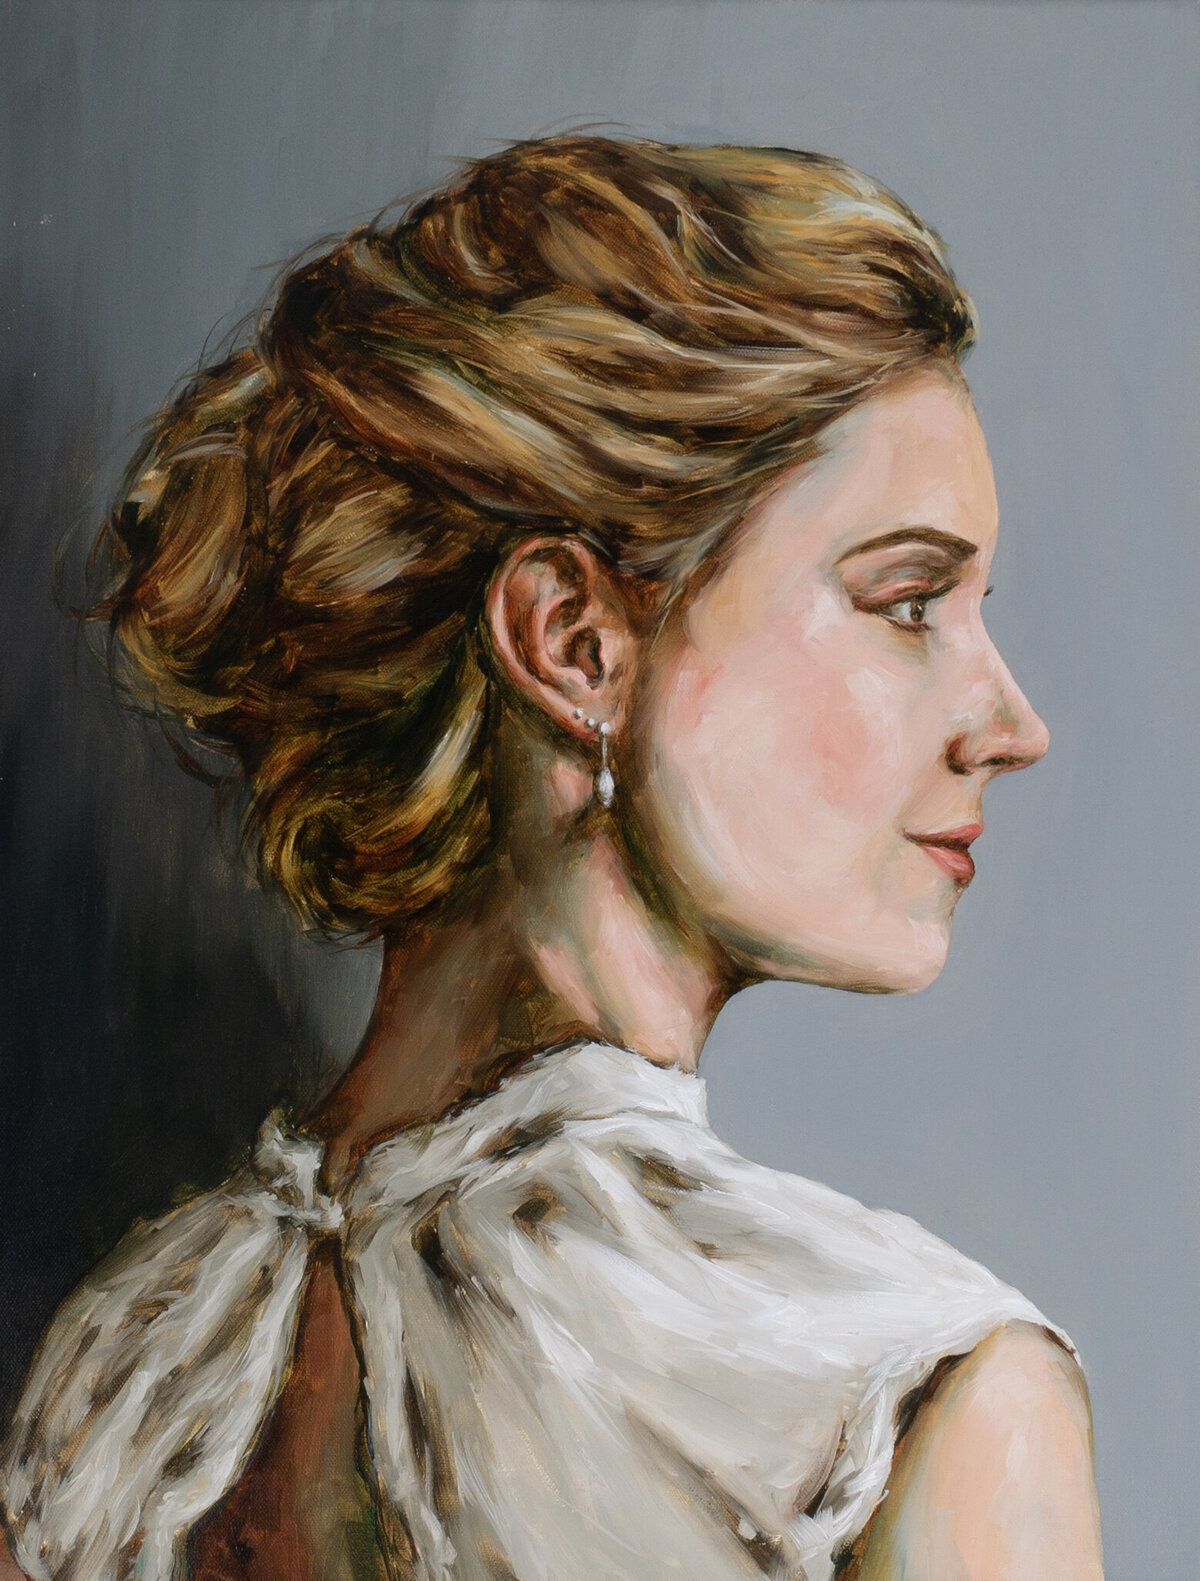 Carly's Luxury Bridal Portrait Painted in New York